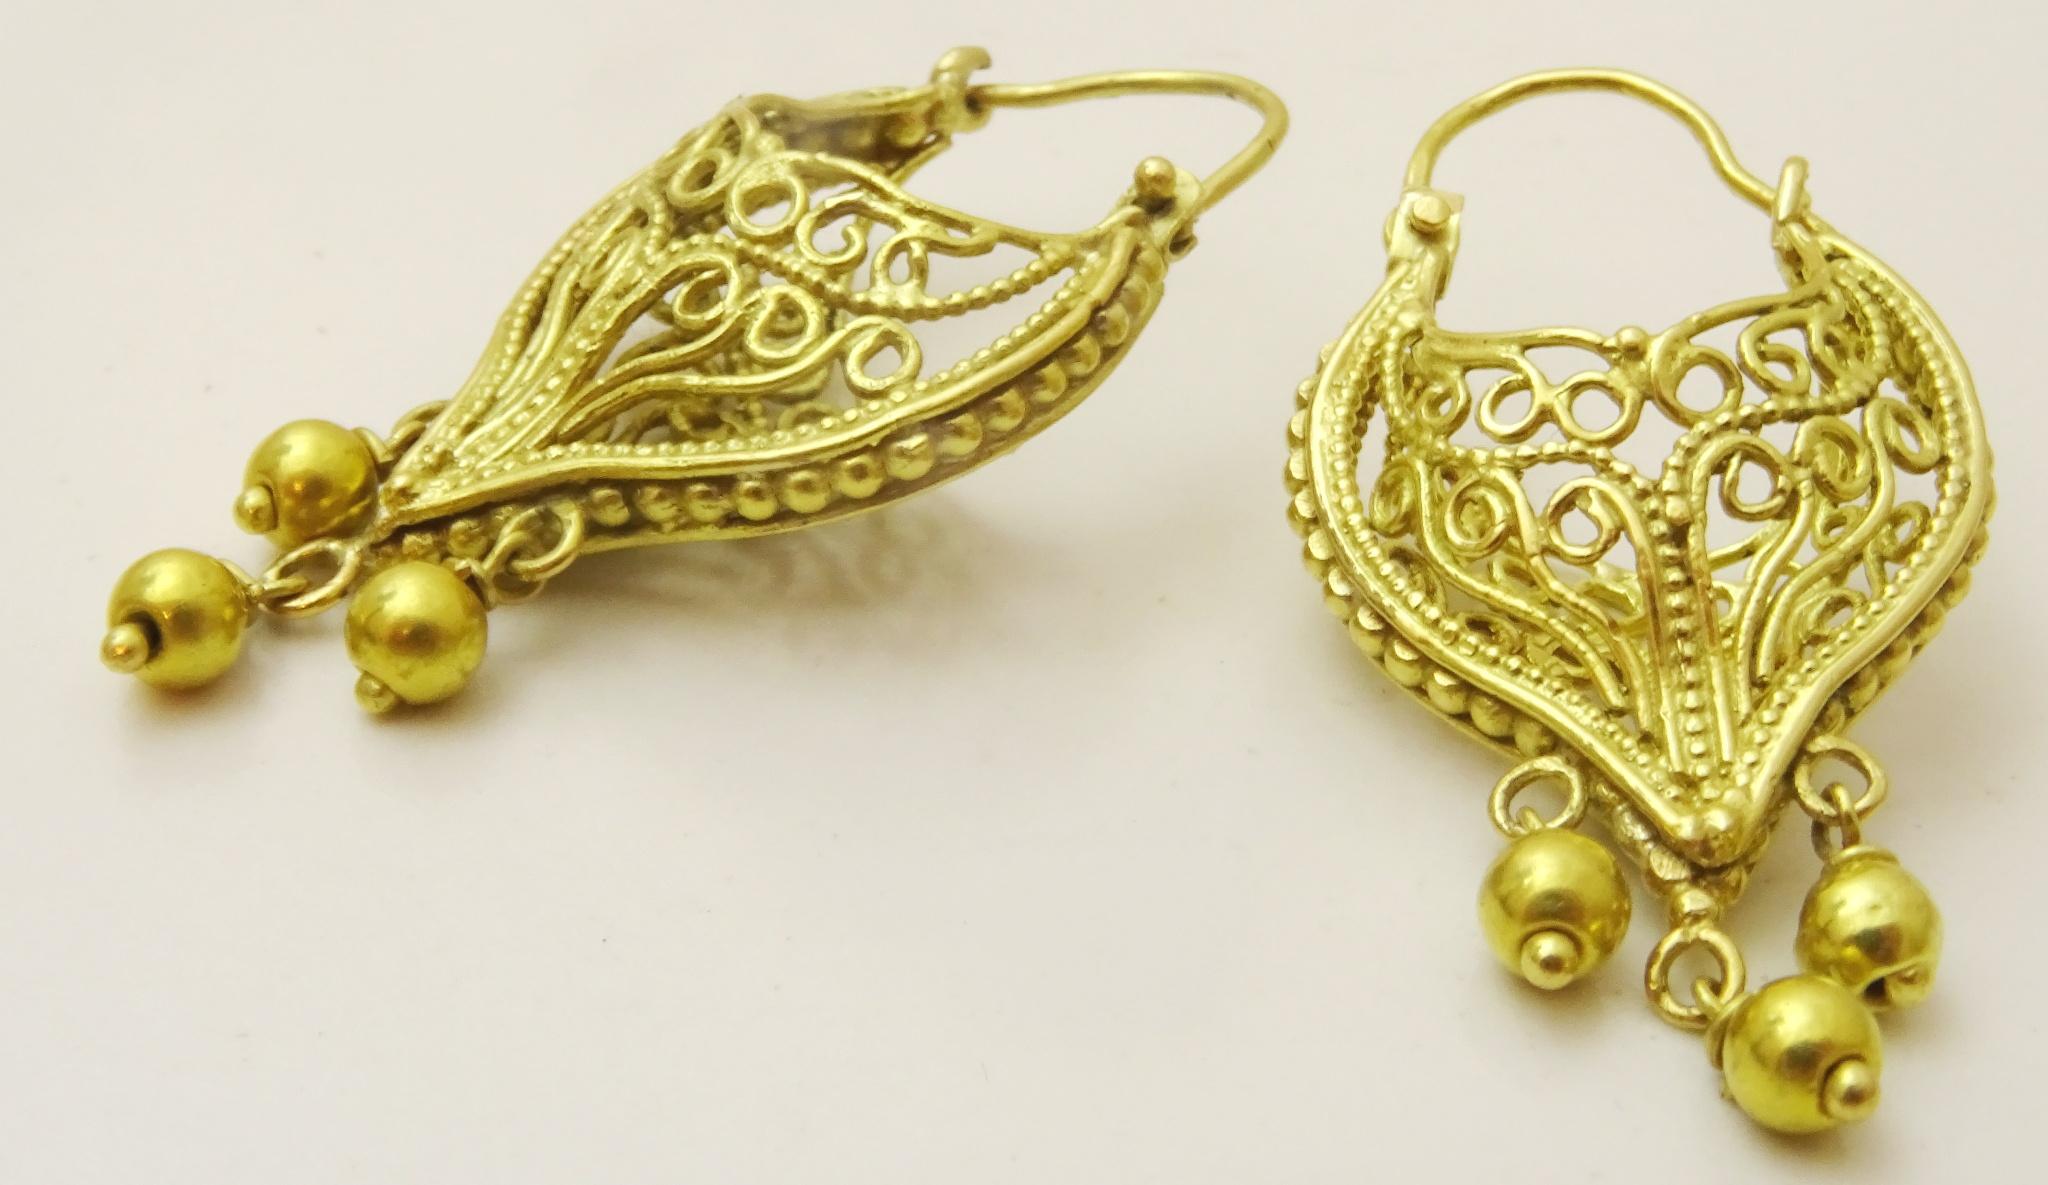 One of the masterpieces from our Jerusalem workshop , the basic concept of the earring comes from the Byzantine early Islamic earrings which were called the Basket of Plenty earrings , those that wore these earrings felt that they had room for